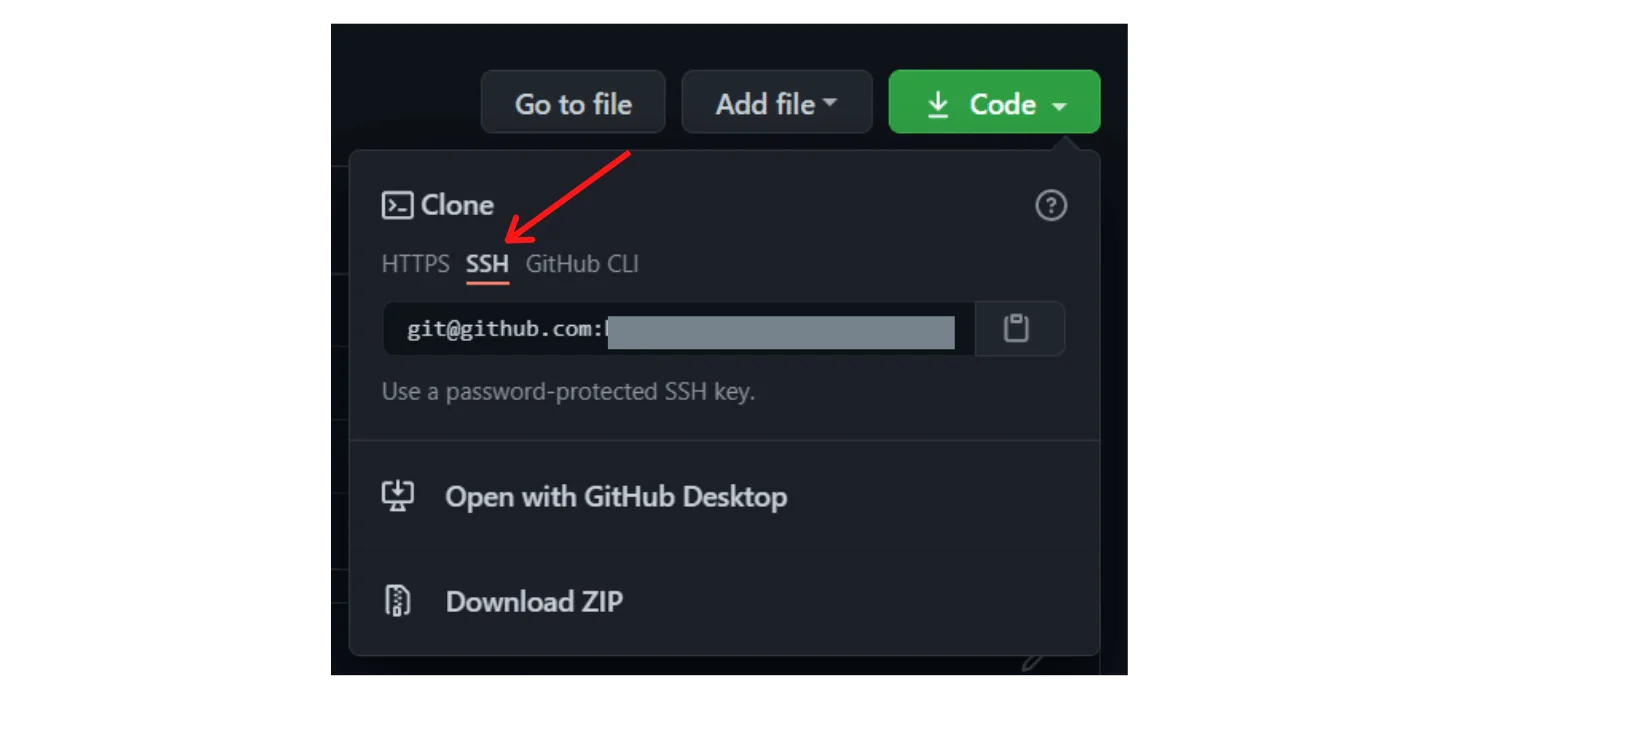 SSH to Link with GitHub - SSH Link to Clone Repo